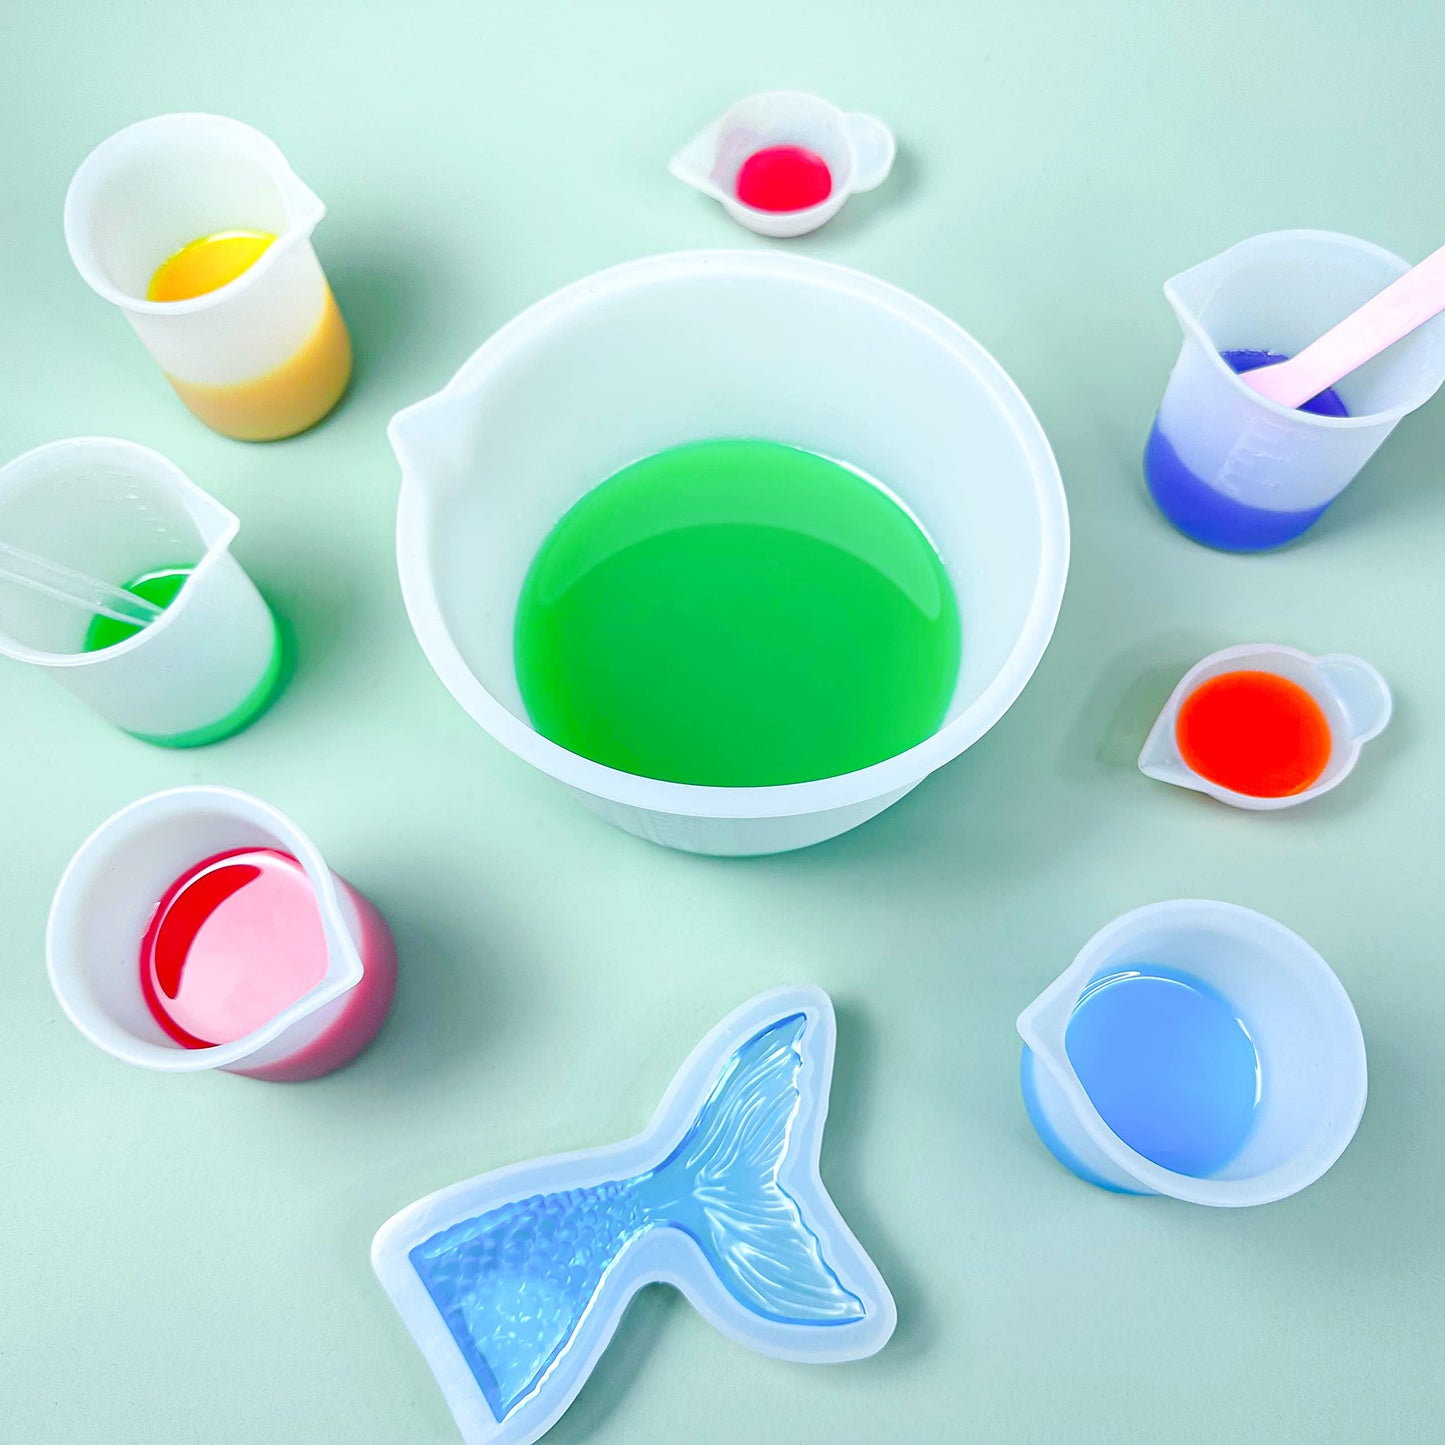 Silicone Measuring Cups Kit for Resin, Epoxy Supplies Set with 600ml, 250ml & 100ml Silicone Cups, Reusable Resin Supplies Cups with Silicone Mat,